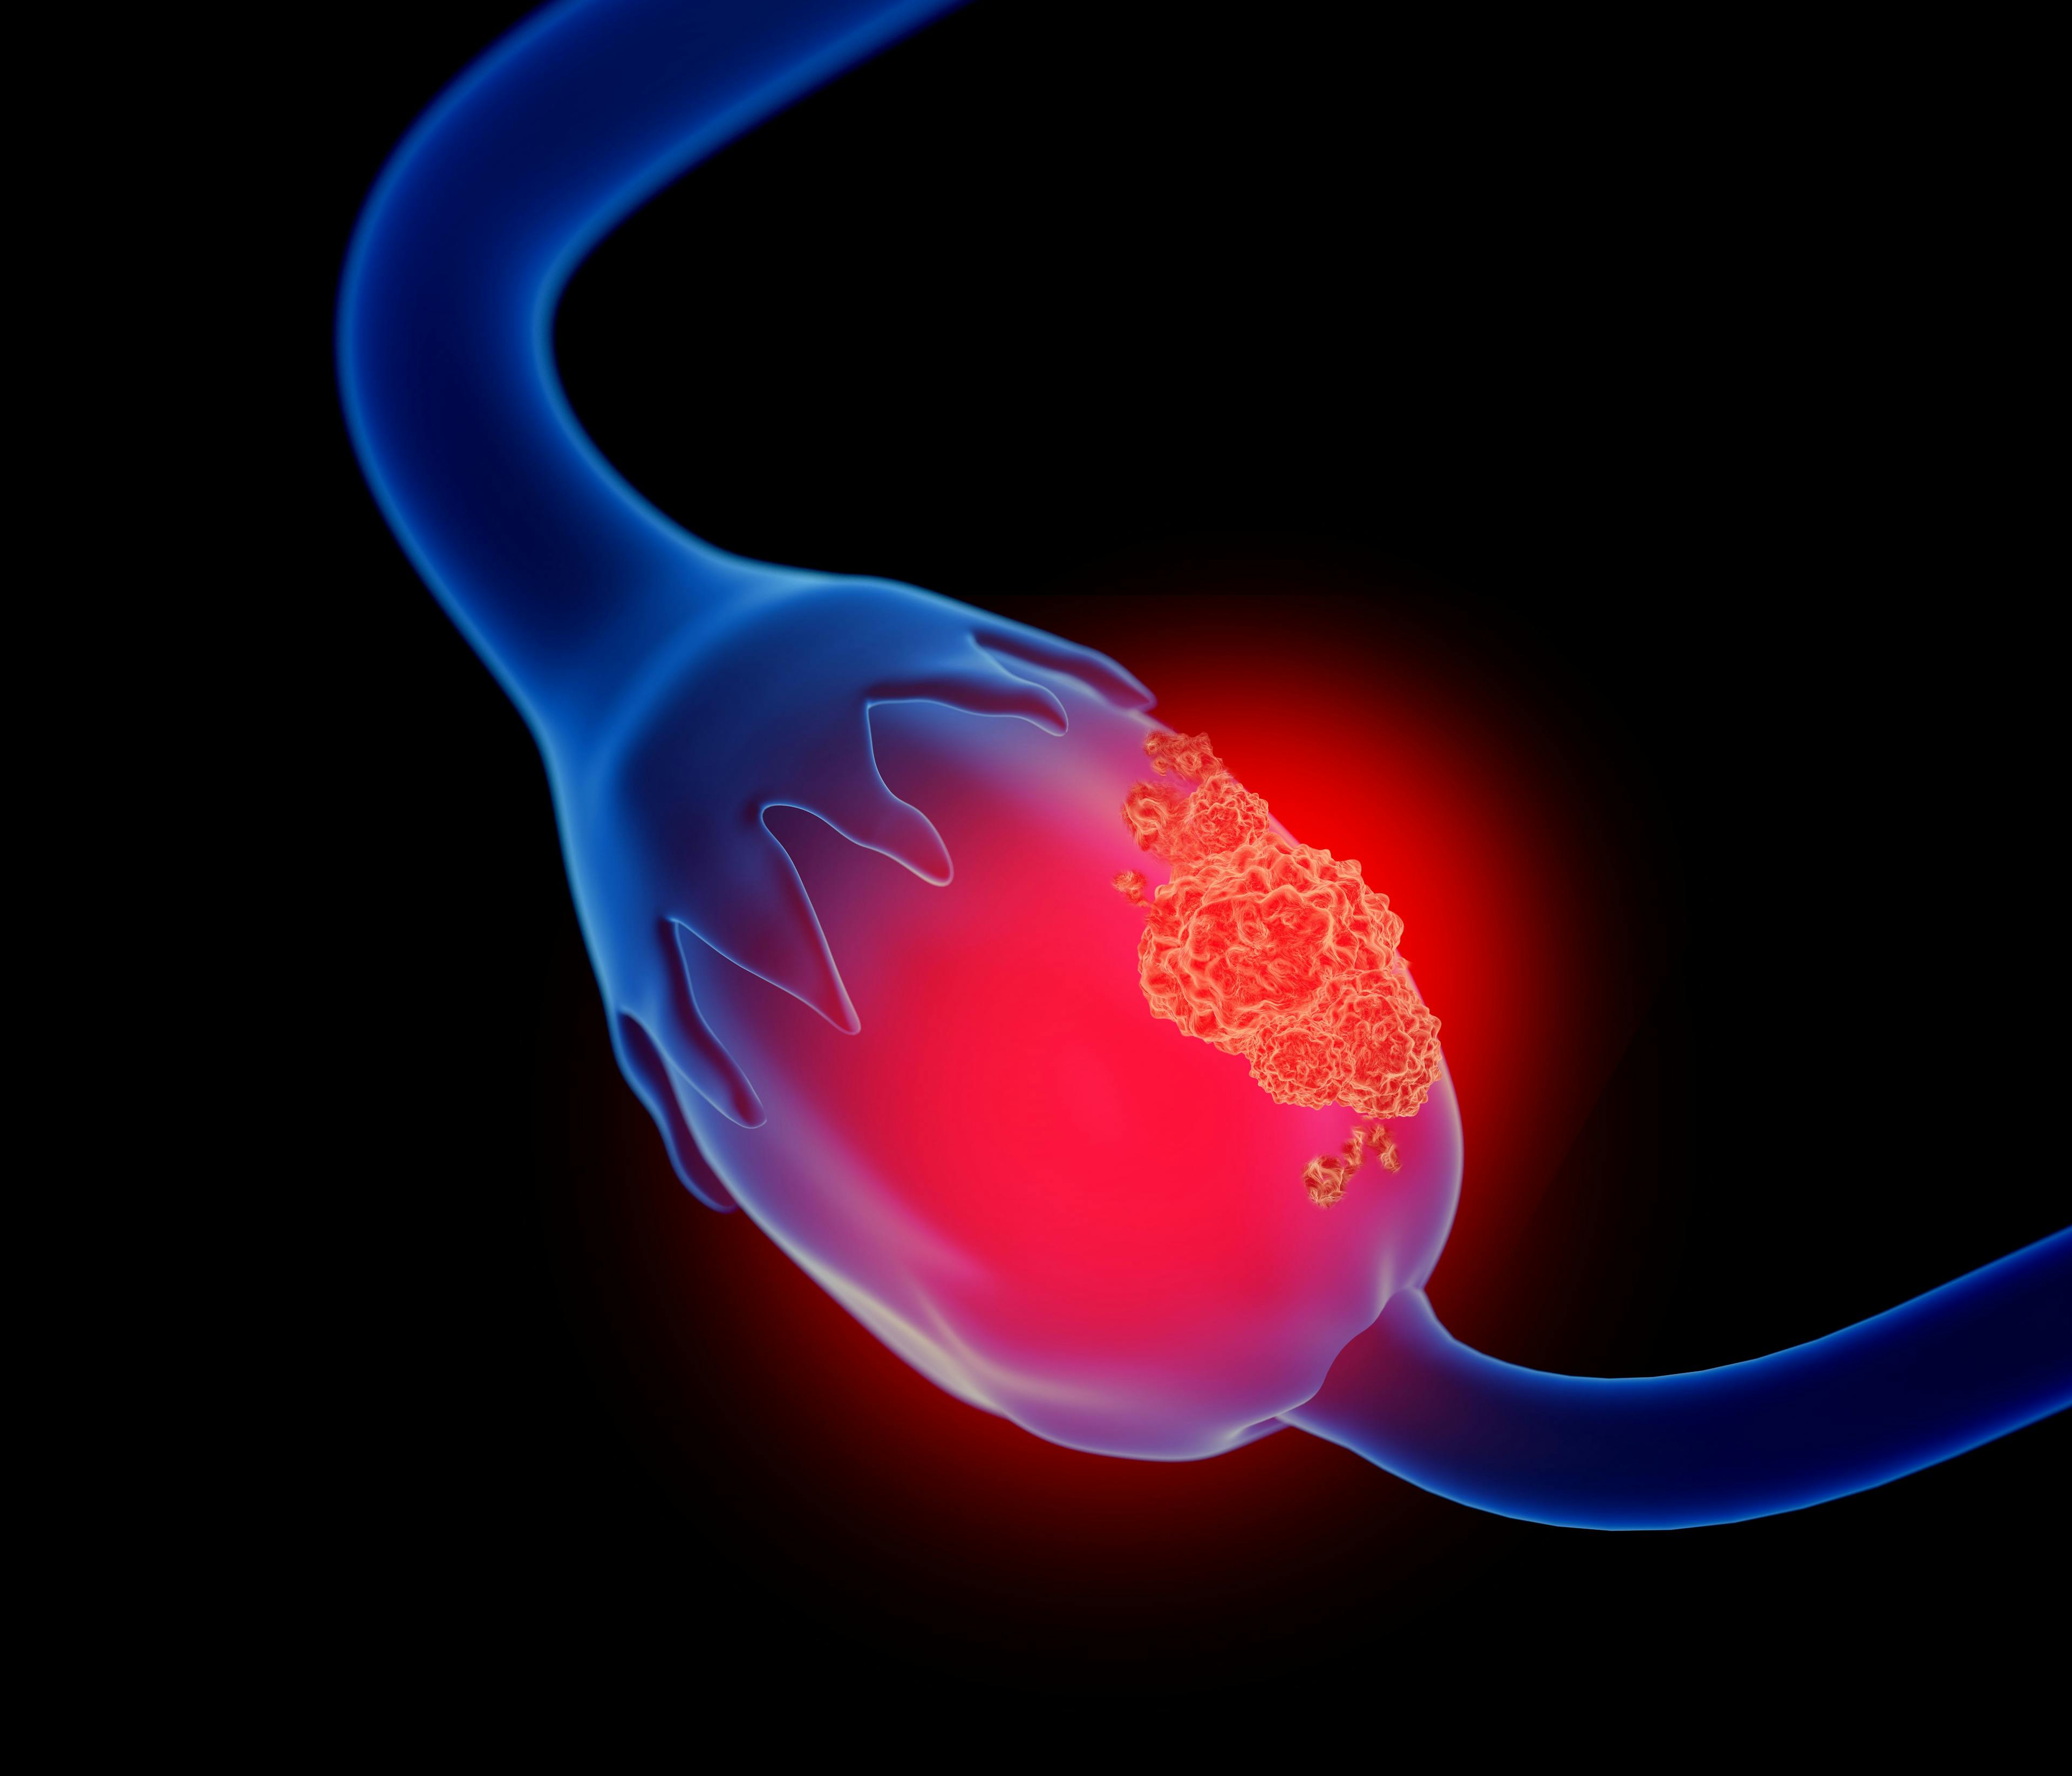 Ovarian cancer recurrence occurs in approximately 70% of cases | Image credit: Lars Neumann - stock.adobe.com